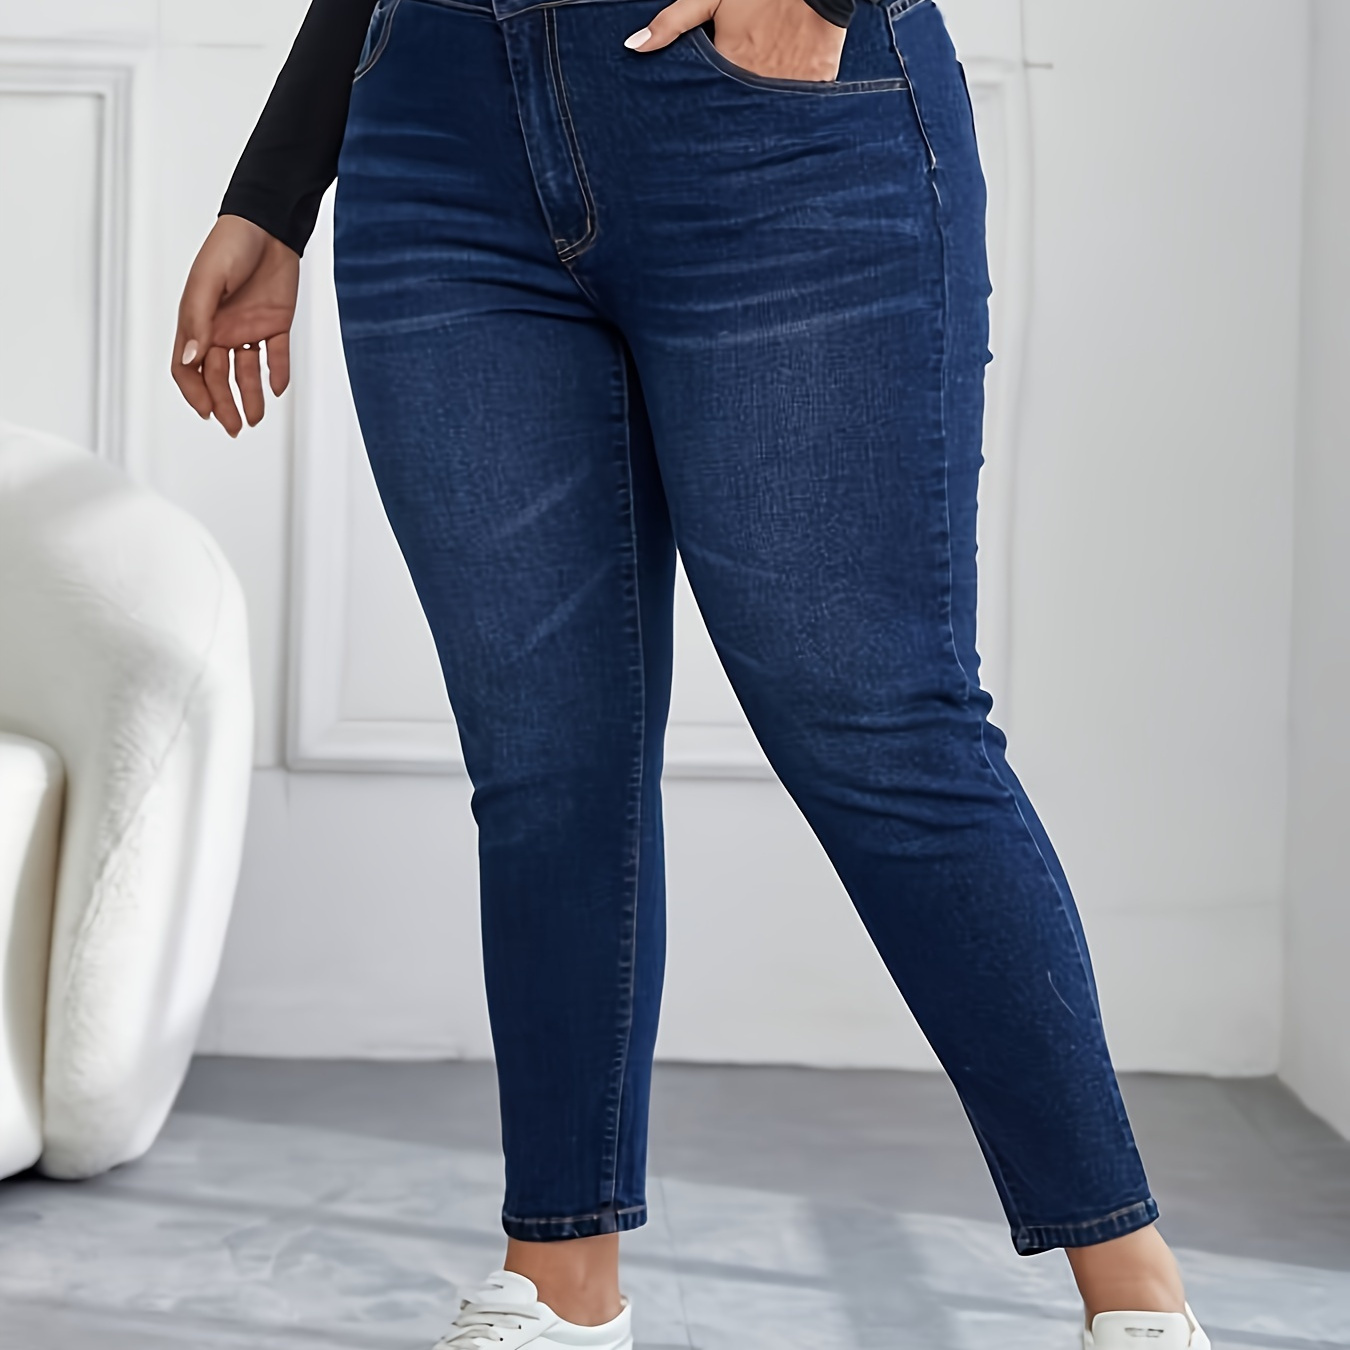 

High-waisted Plus Size Women's Jeans, Casual Solid Color Denim Pants, Slim Fit, Single-breasted Button Closure, Fashionable Daily Wear, Versatile Full-length Trousers - Blue